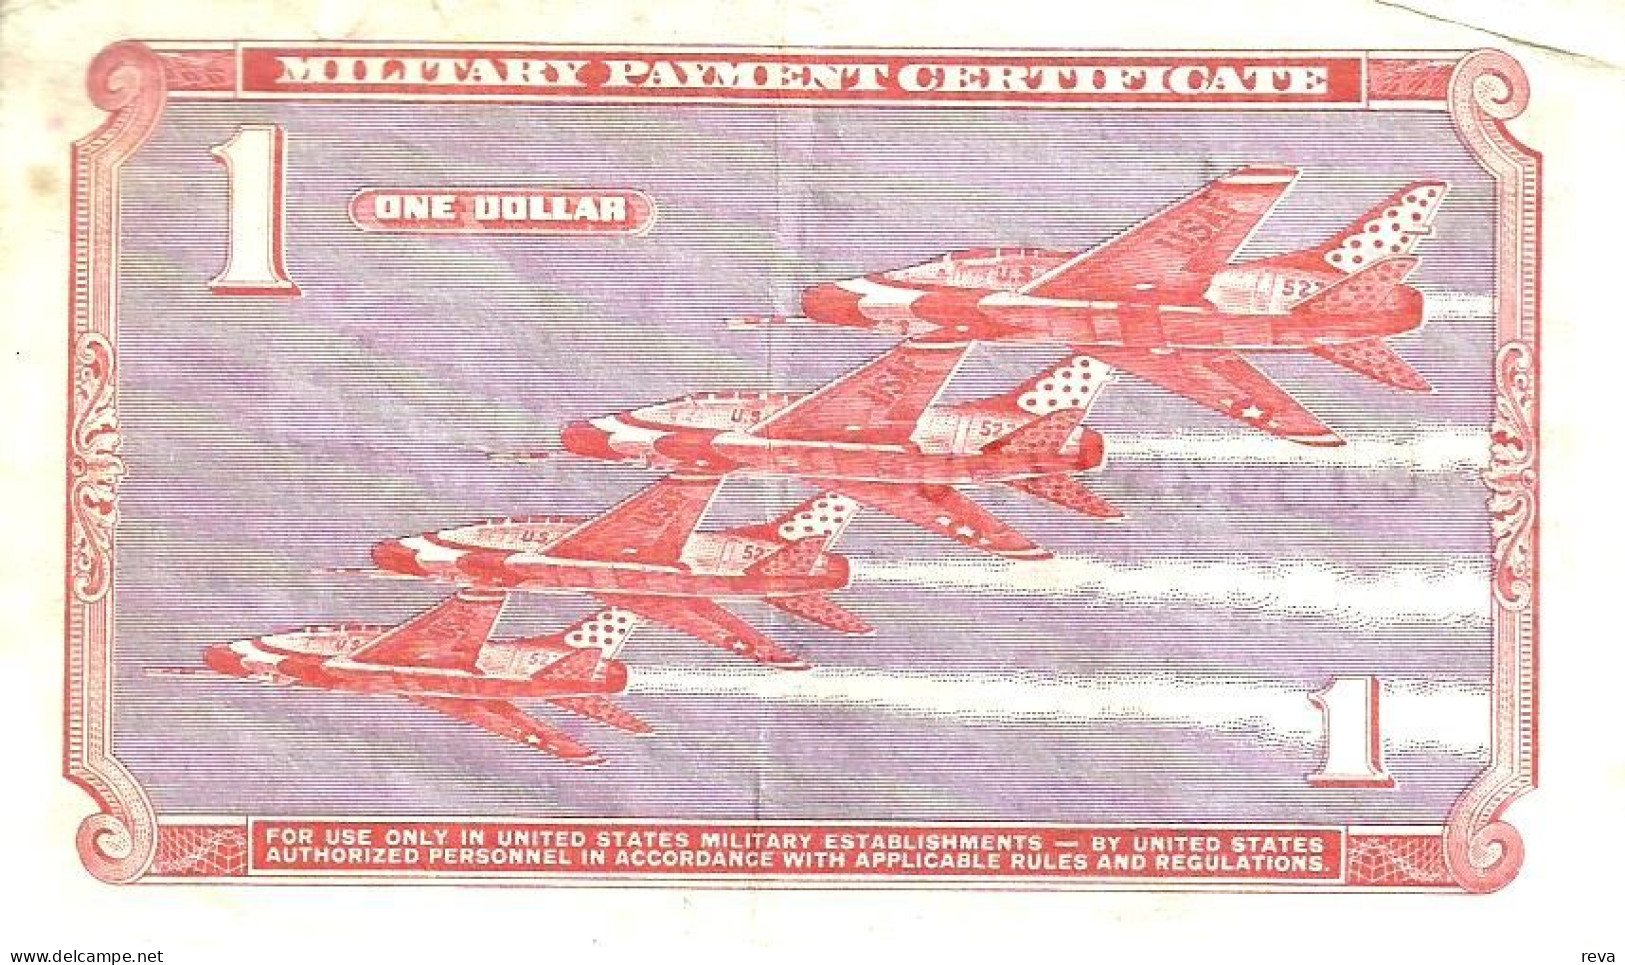 USA UNITED STATES $1 MILITARY CERTIFICATE PURPLE MAN AIRPLANES SERIES 861VF ND(1969) PM79a READ DESCRIPTION CAREFULLY !! - 1969-1970 - Series 681